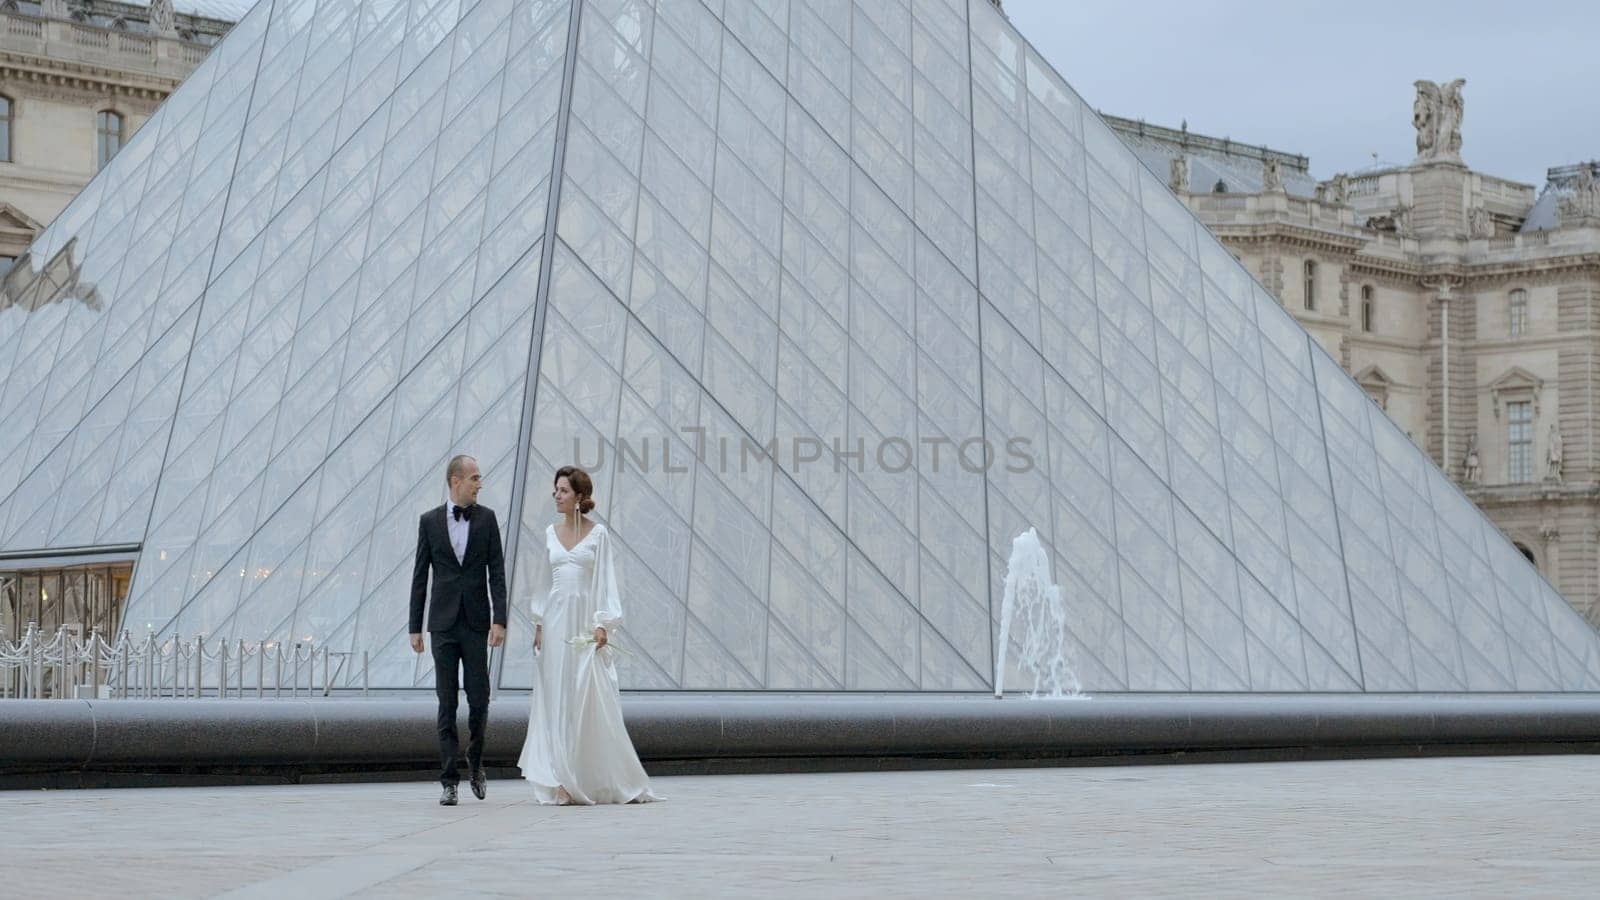 Wedding couple walking on the background of the Louvre pyramid, France, Paris. Action. Romantic wedding shooting near museum